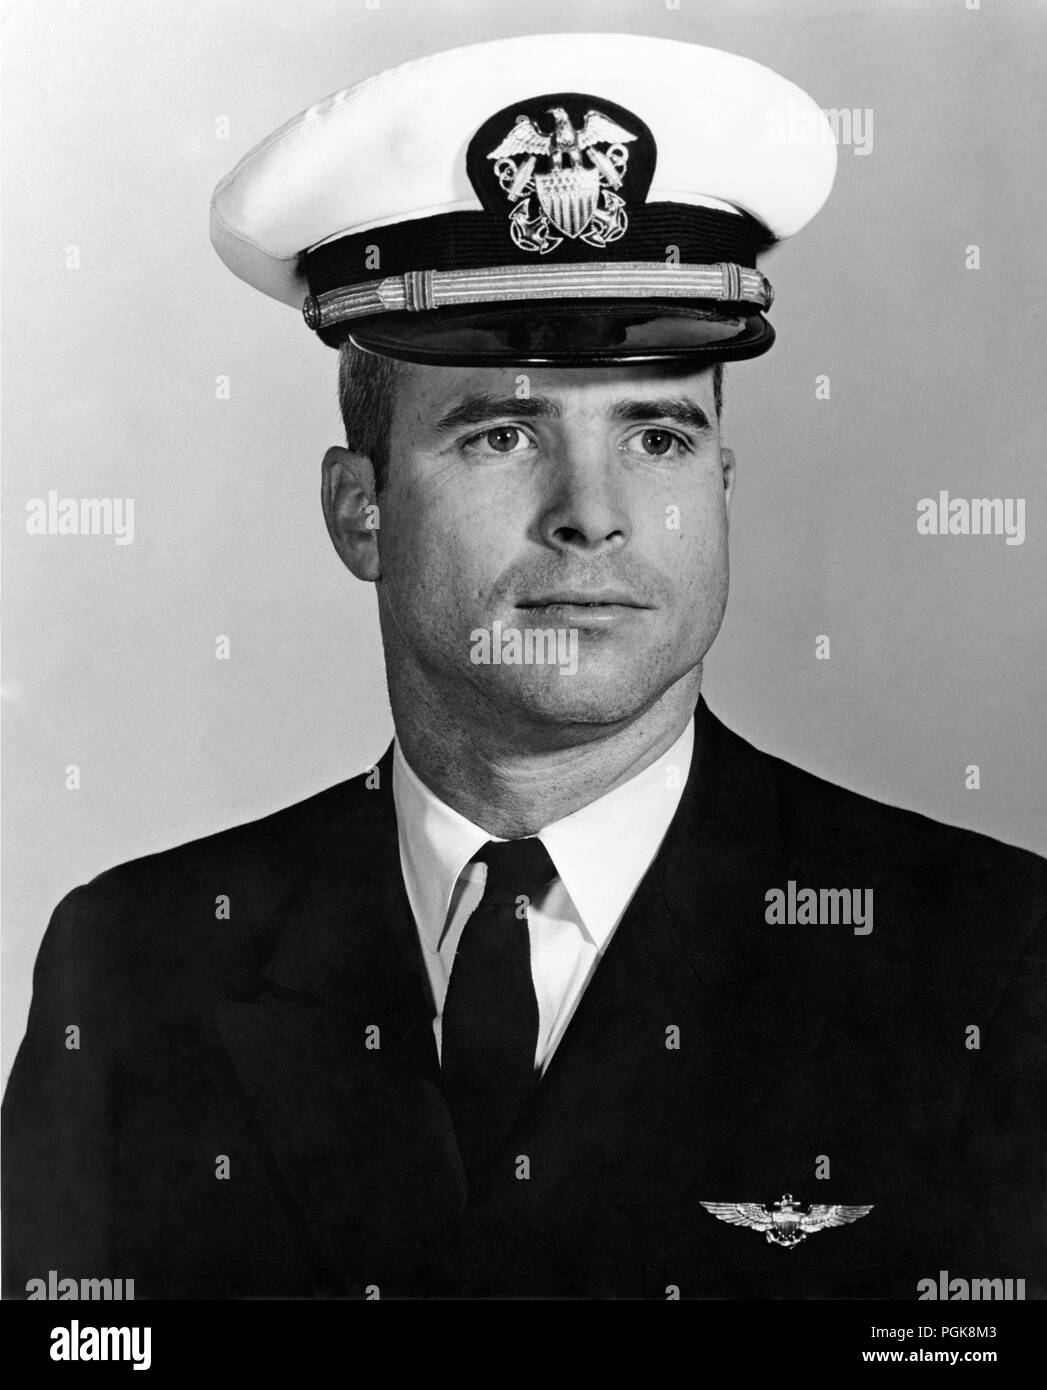 U.S. Navy file photo dated January 13, 1964 of U.S. Navy Lieutenant John S. McCain III (August 29, 1936 – August 25, 2018). McCain who died from brain cancer on August 25, 2018 was an American politician and naval officer who served as a United States Senator from Arizona from 1987 until his death. He previously served two terms in the United States House of Representatives and was the Republican nominee for President of the United States in the 2008 election, which he lost to Barack Obama. Stock Photo